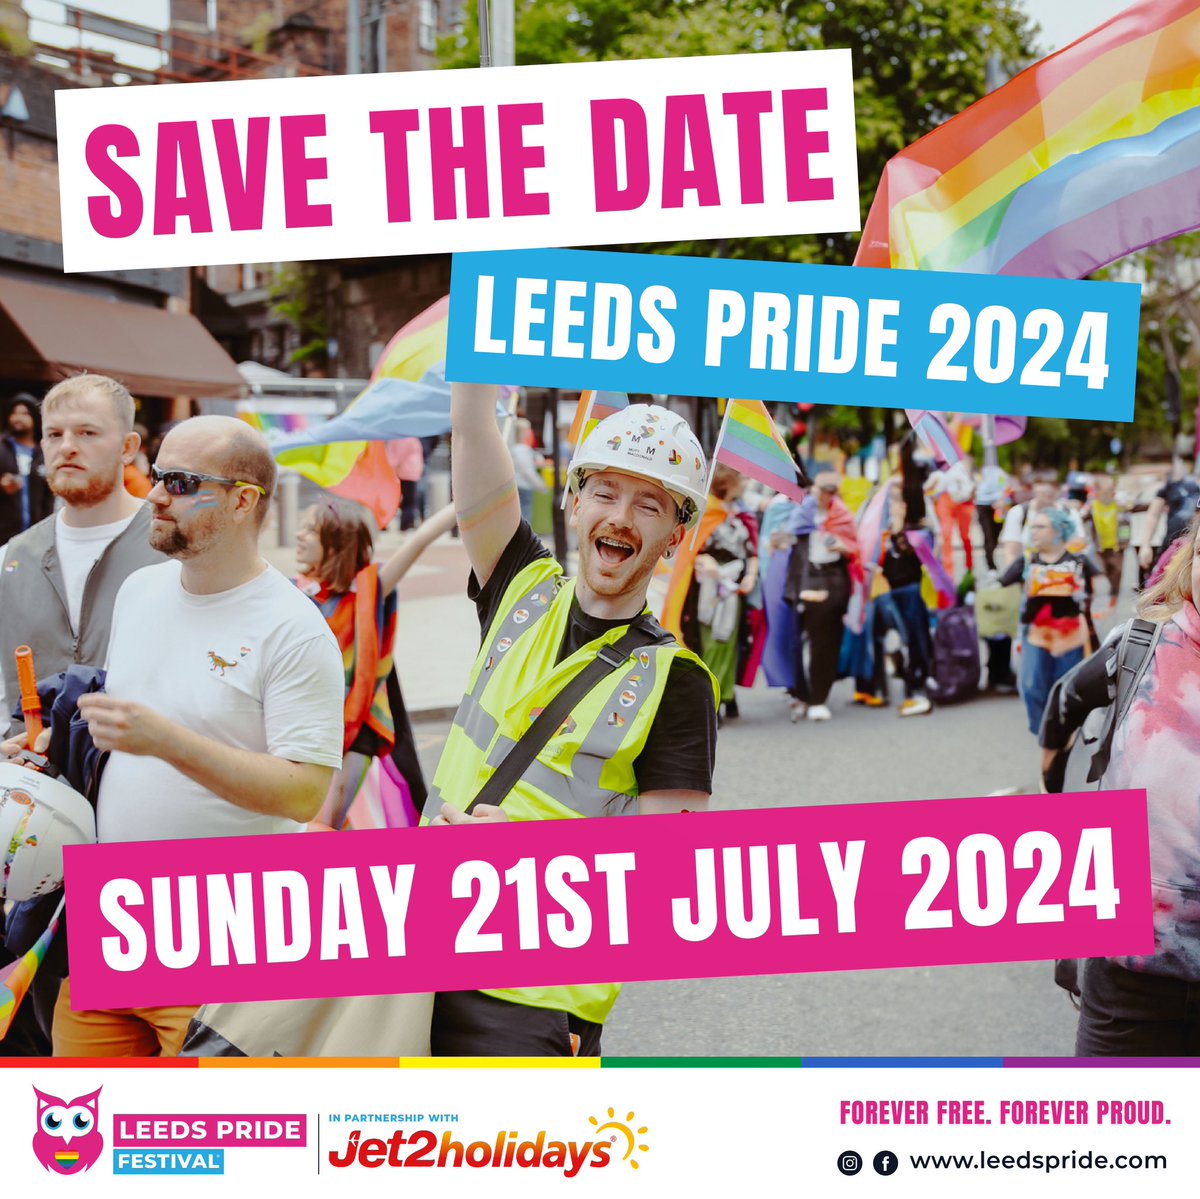 Our team has been making waves with the new plans for this year! 🤩 We’ll shortly be announcing our additonal pride events for this year, which will take place around the city. Remember to look out for the line-up announcement on Thursday. 📣 Have a great Sunday! 🏳️‍🌈🏳️‍⚧️